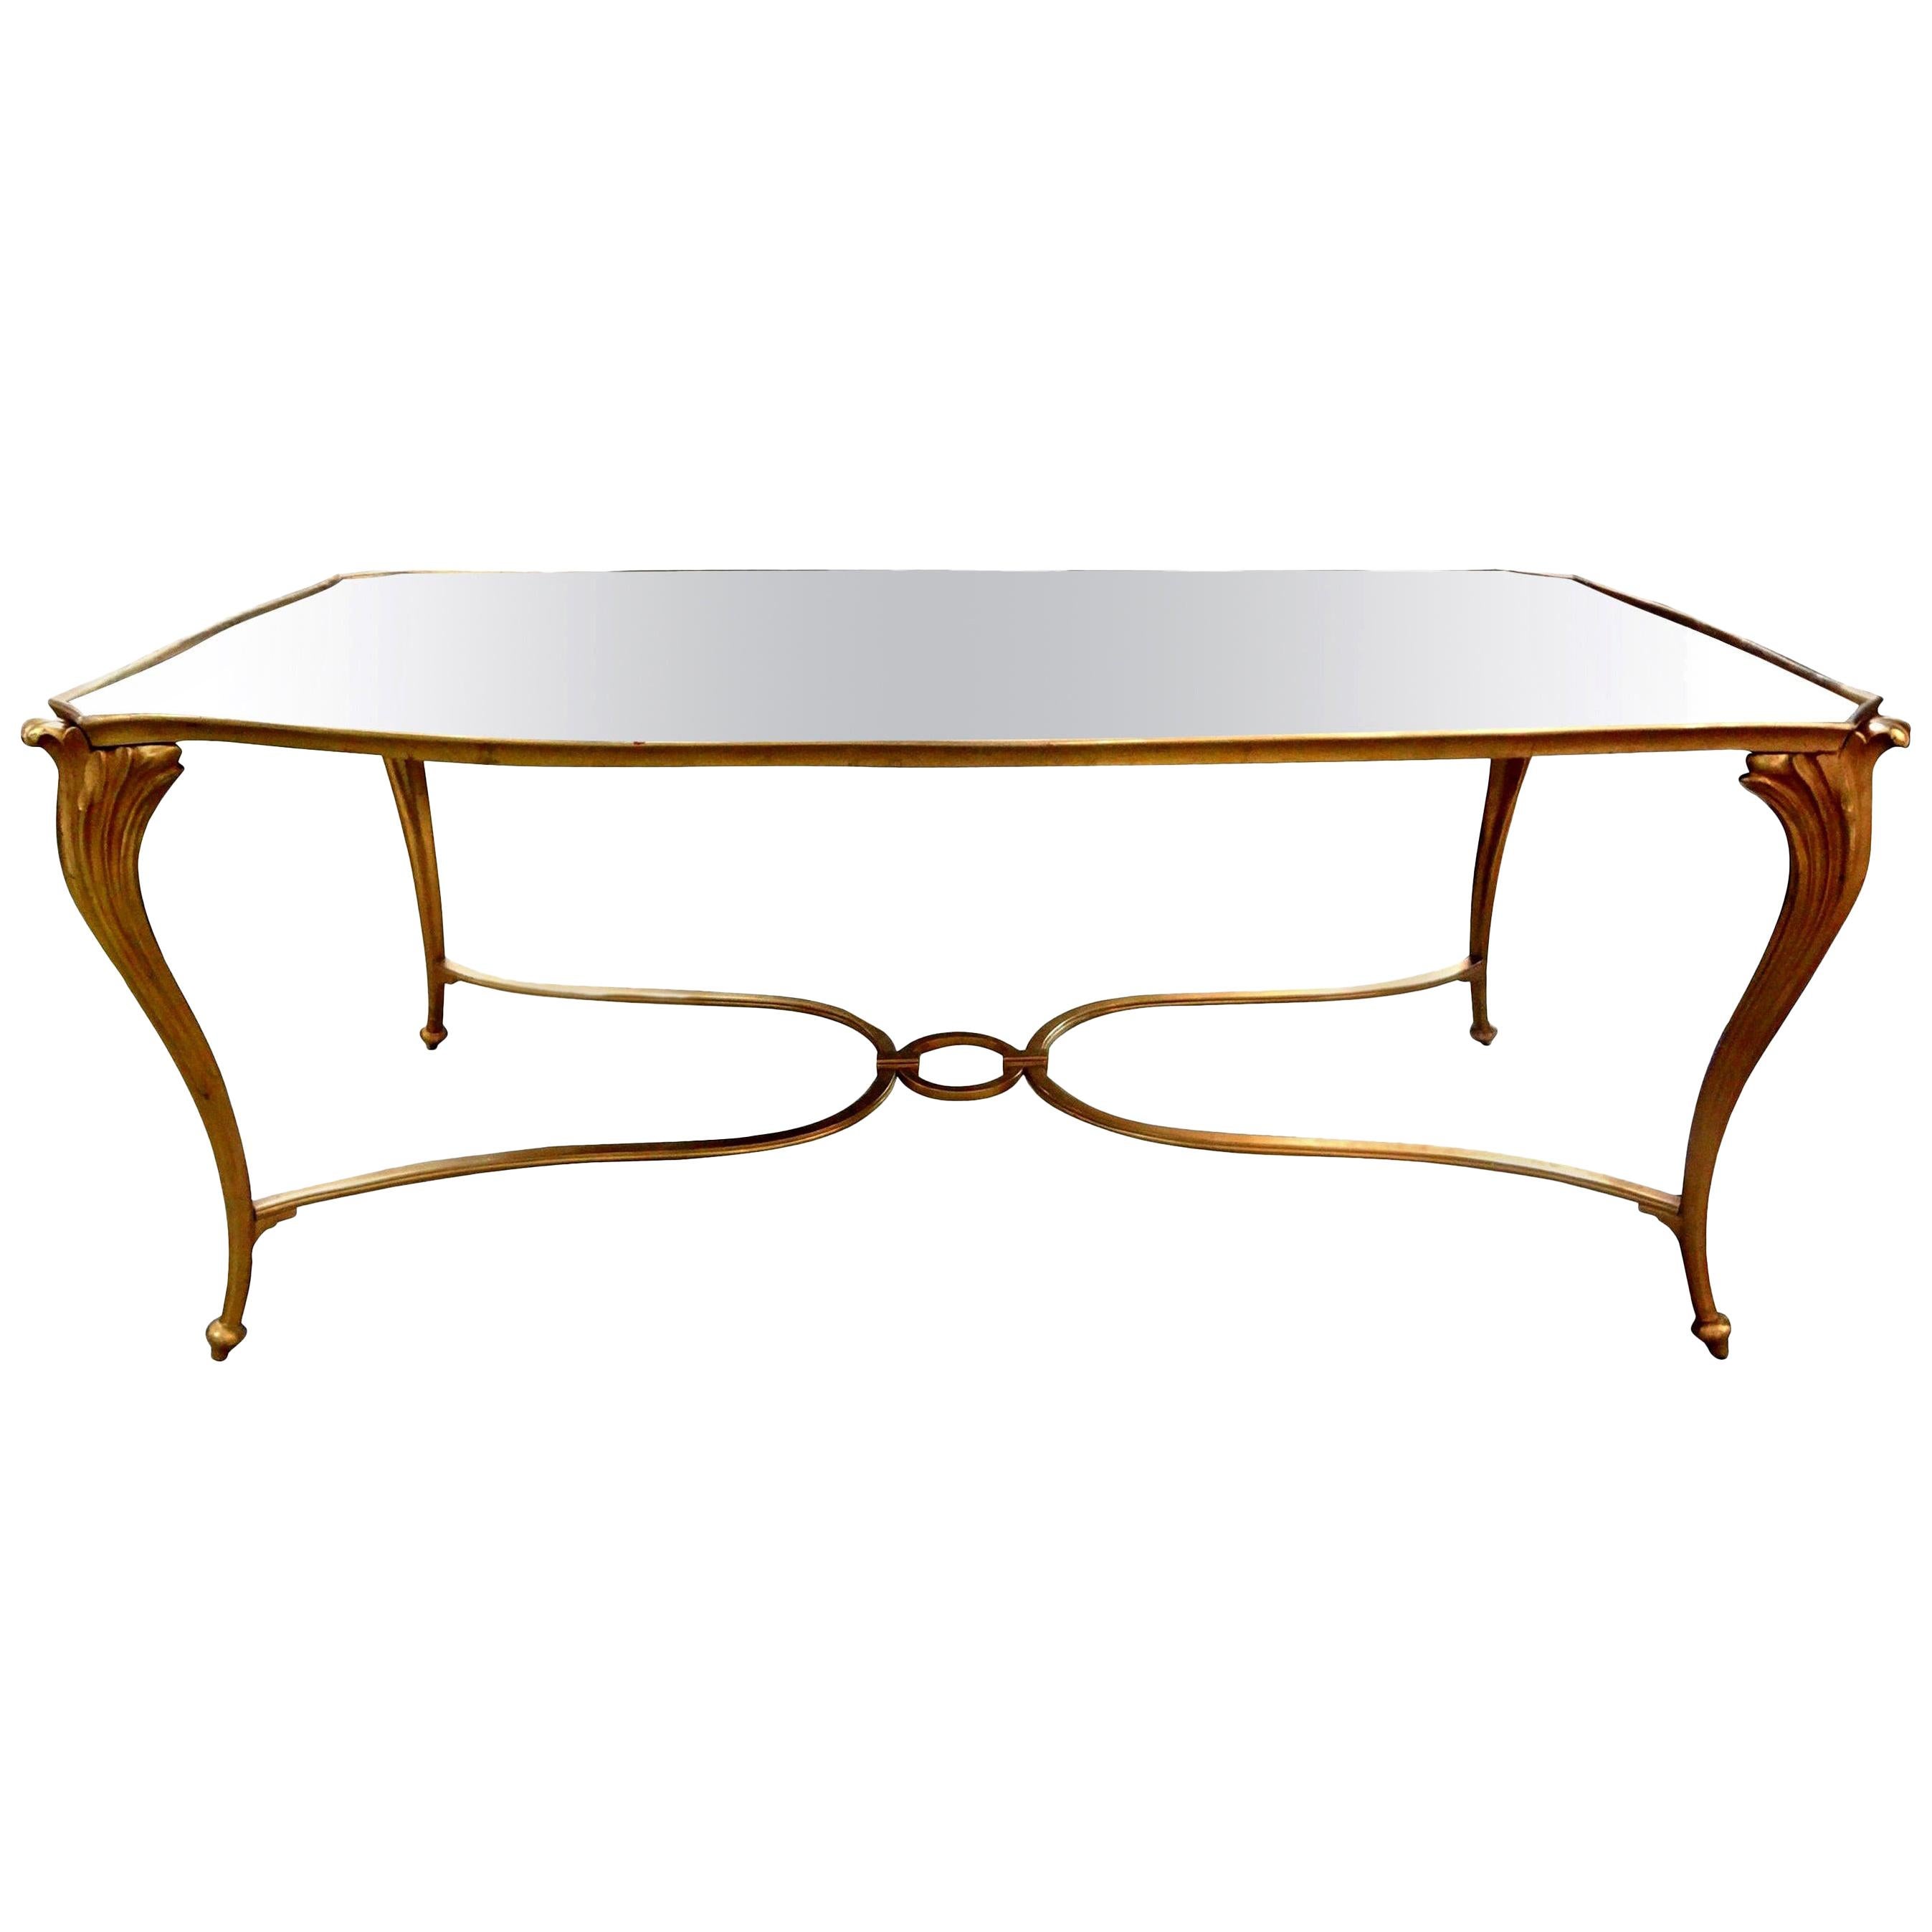 French Gilt Bronze Cocktail Table with Mirrored Top, Maison Baguès Attributed